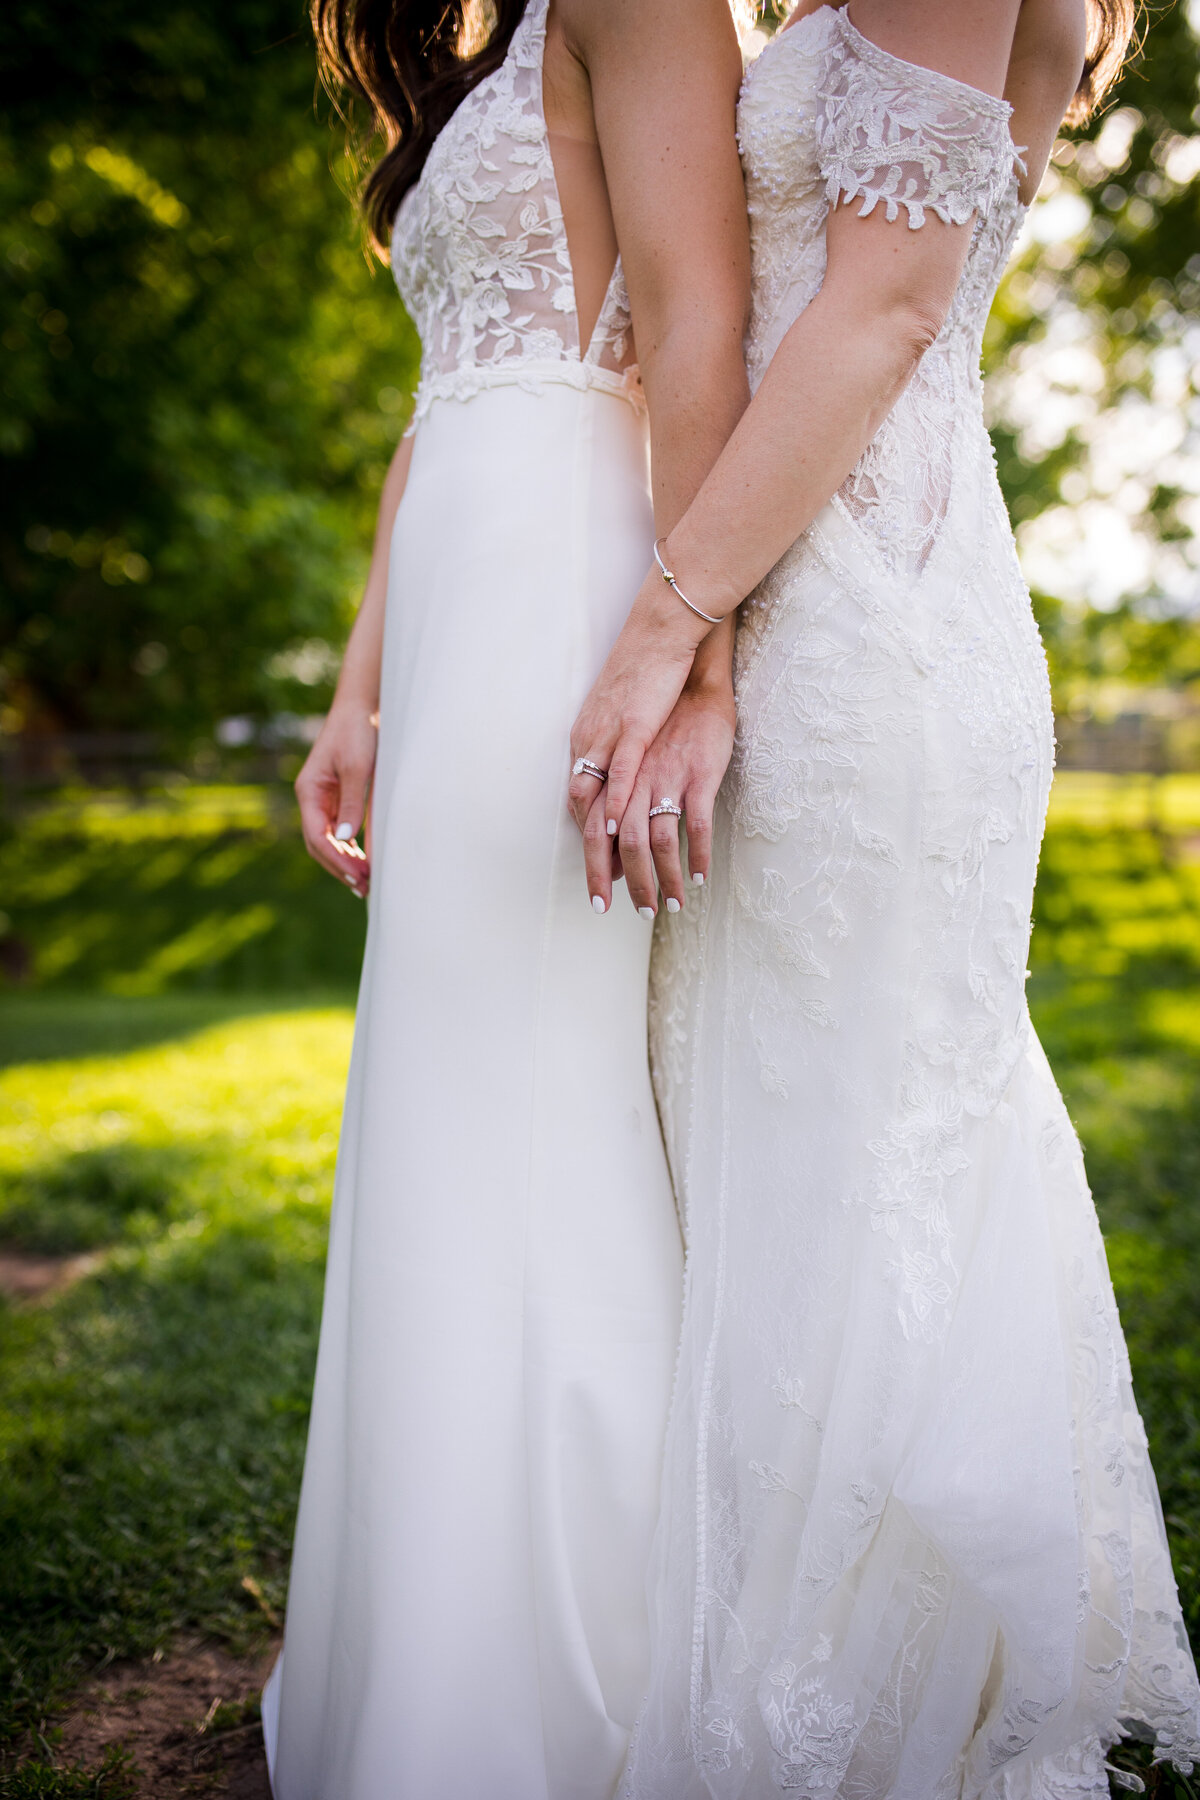 A close up detail shot of two brides' hands intertwined.